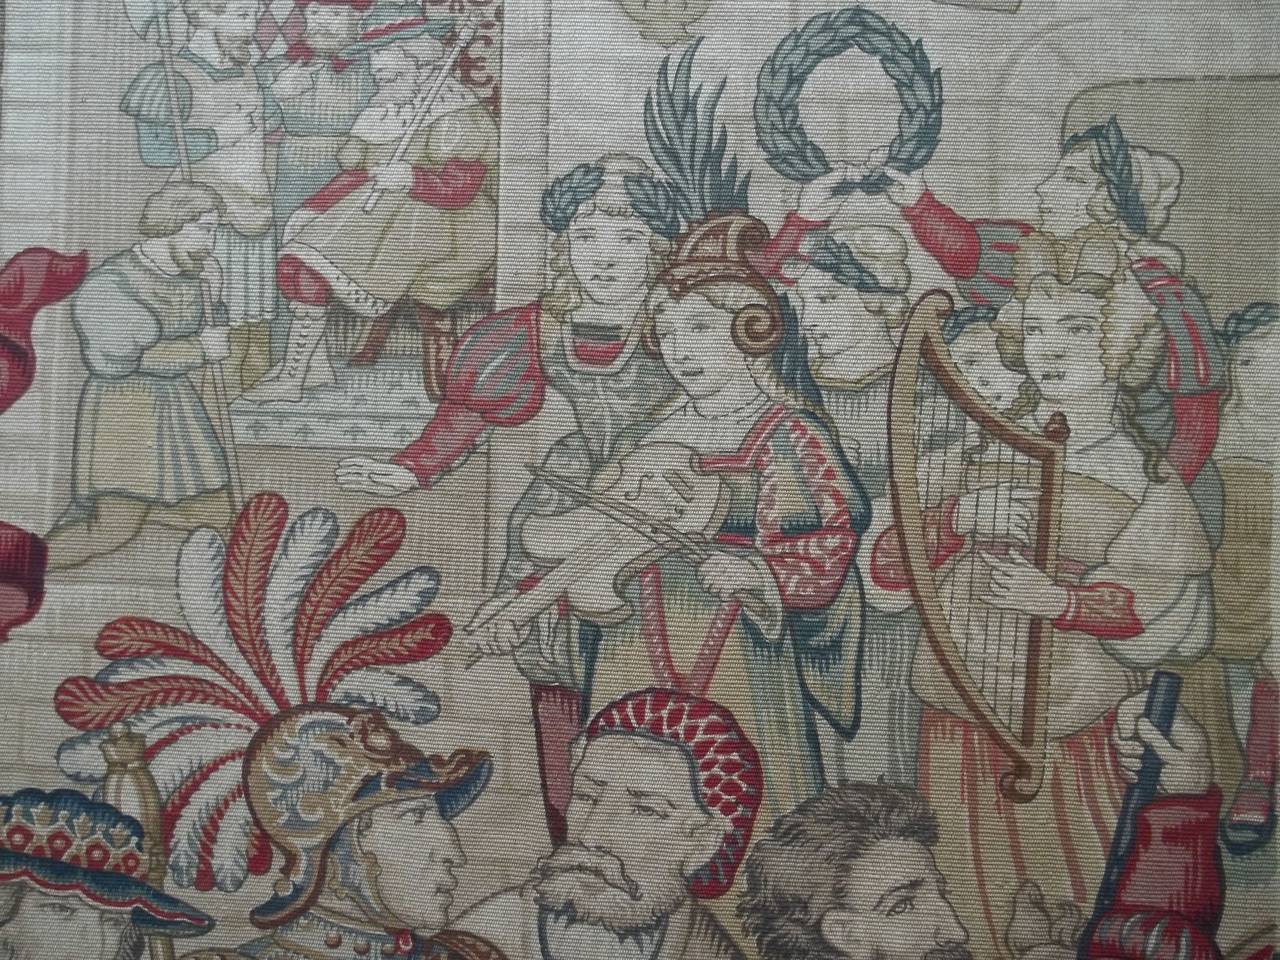 Fabric Superb, Large, Wall Hanging, Tapestry, Rich Medieval Pattern, French, circa 1900